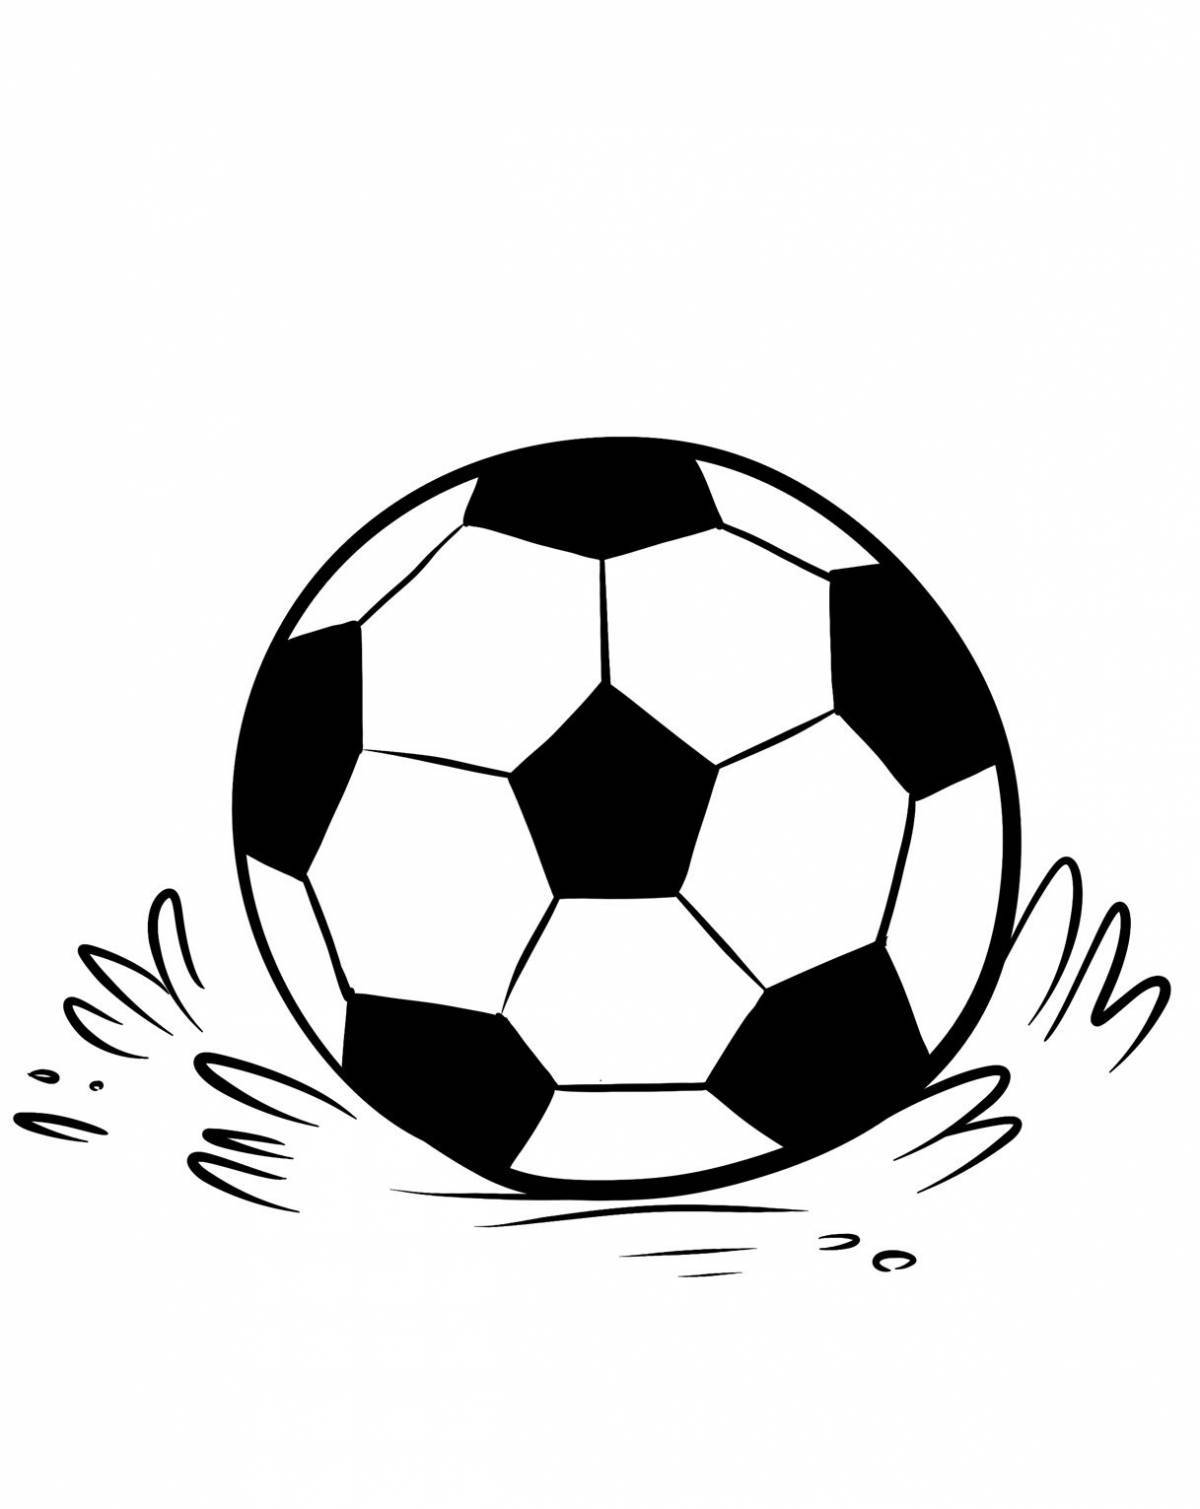 Coloring page unusual soccer ball